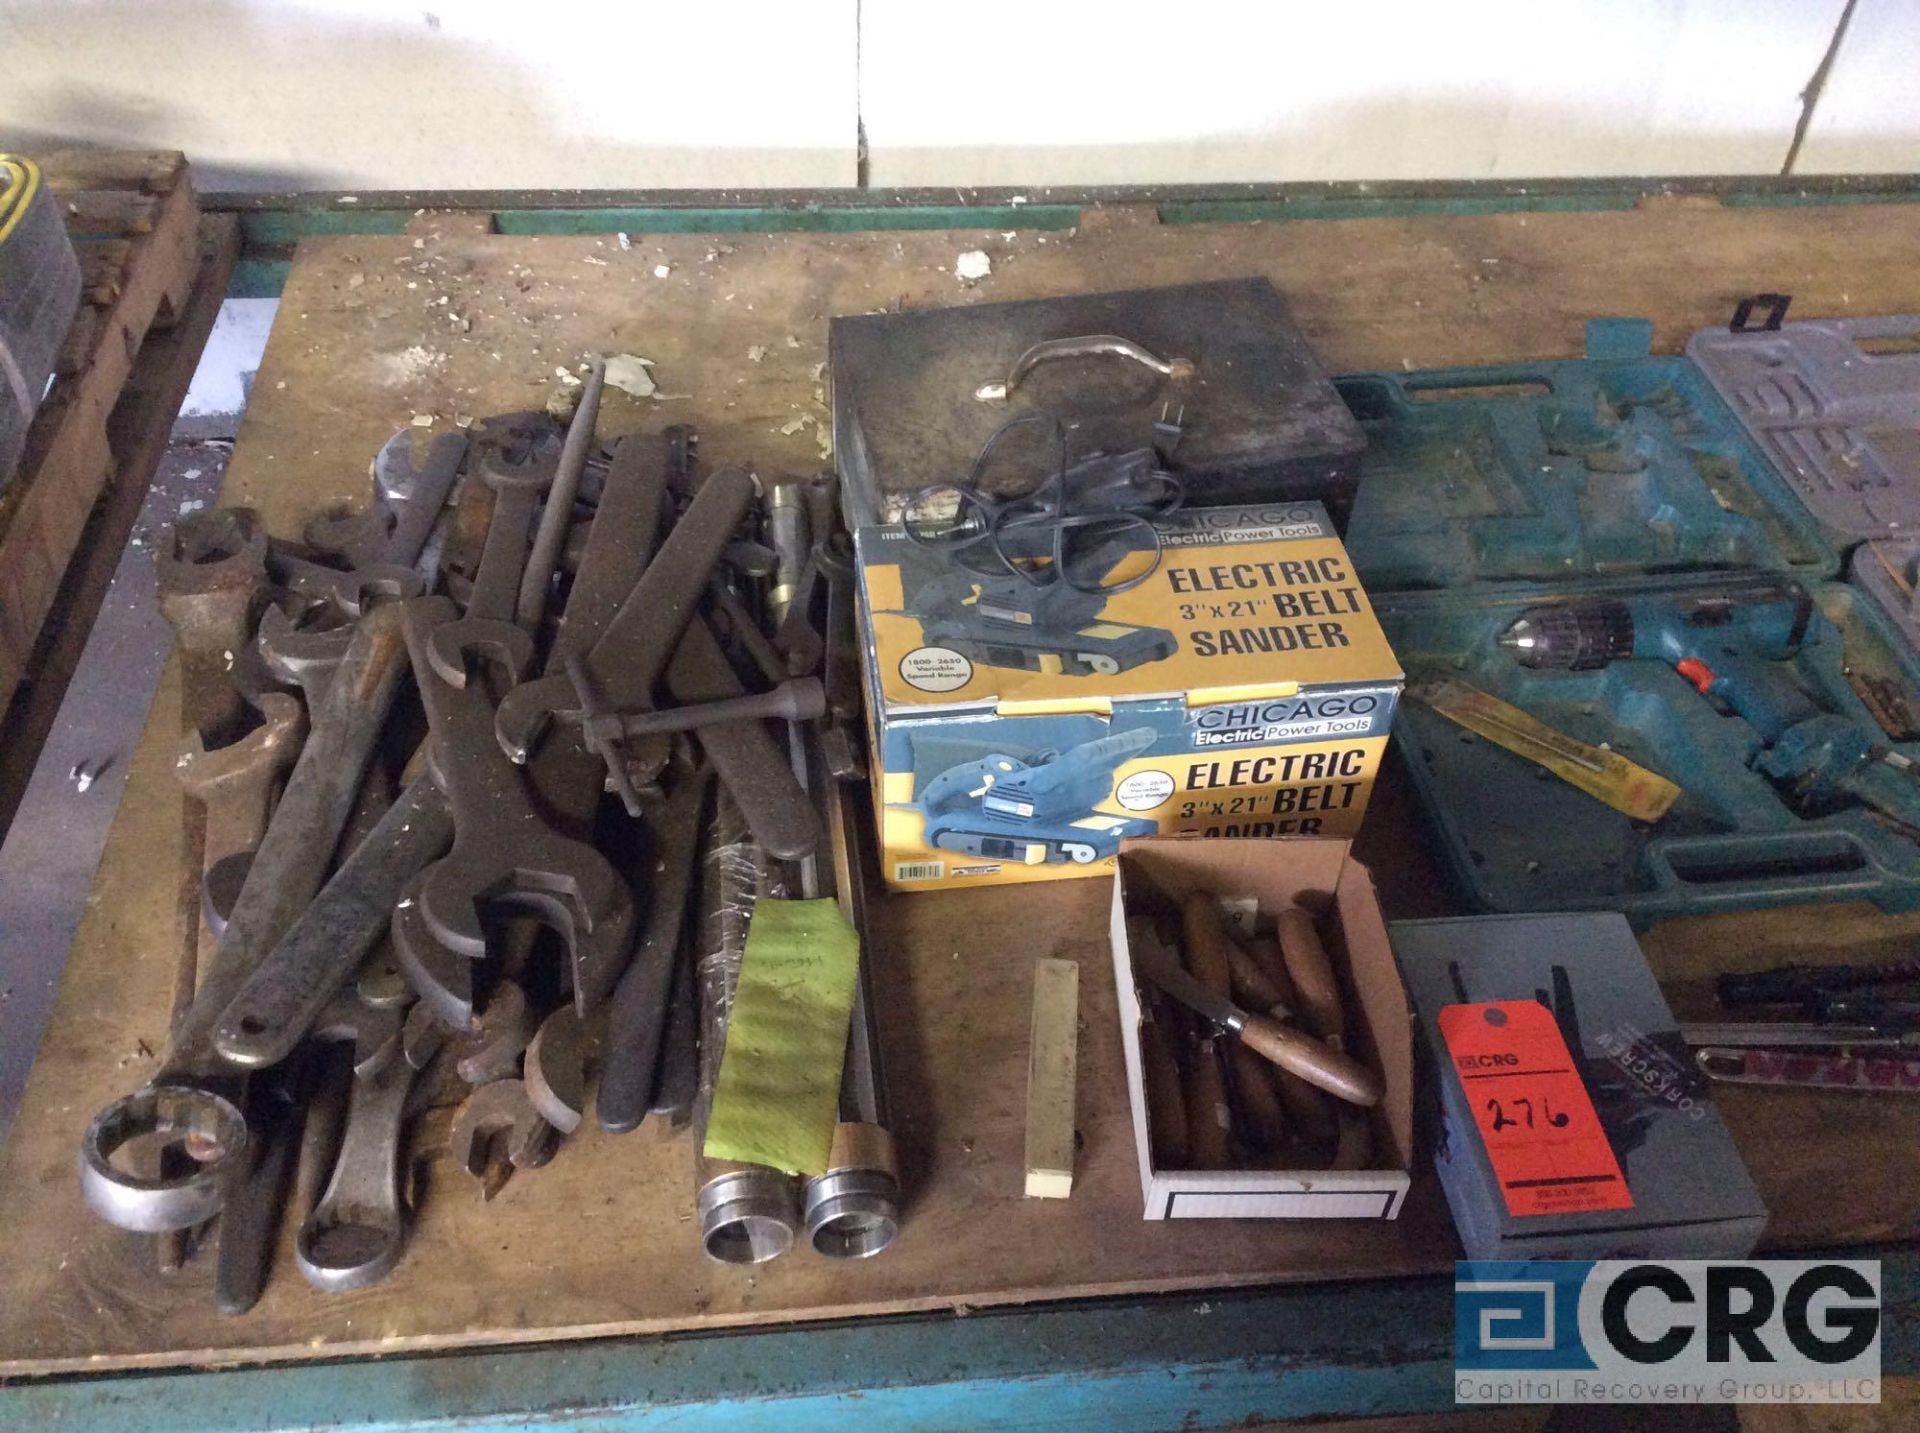 Lot of asst handtools including wrenches, hammer drills, puller set, etc. - Image 5 of 8